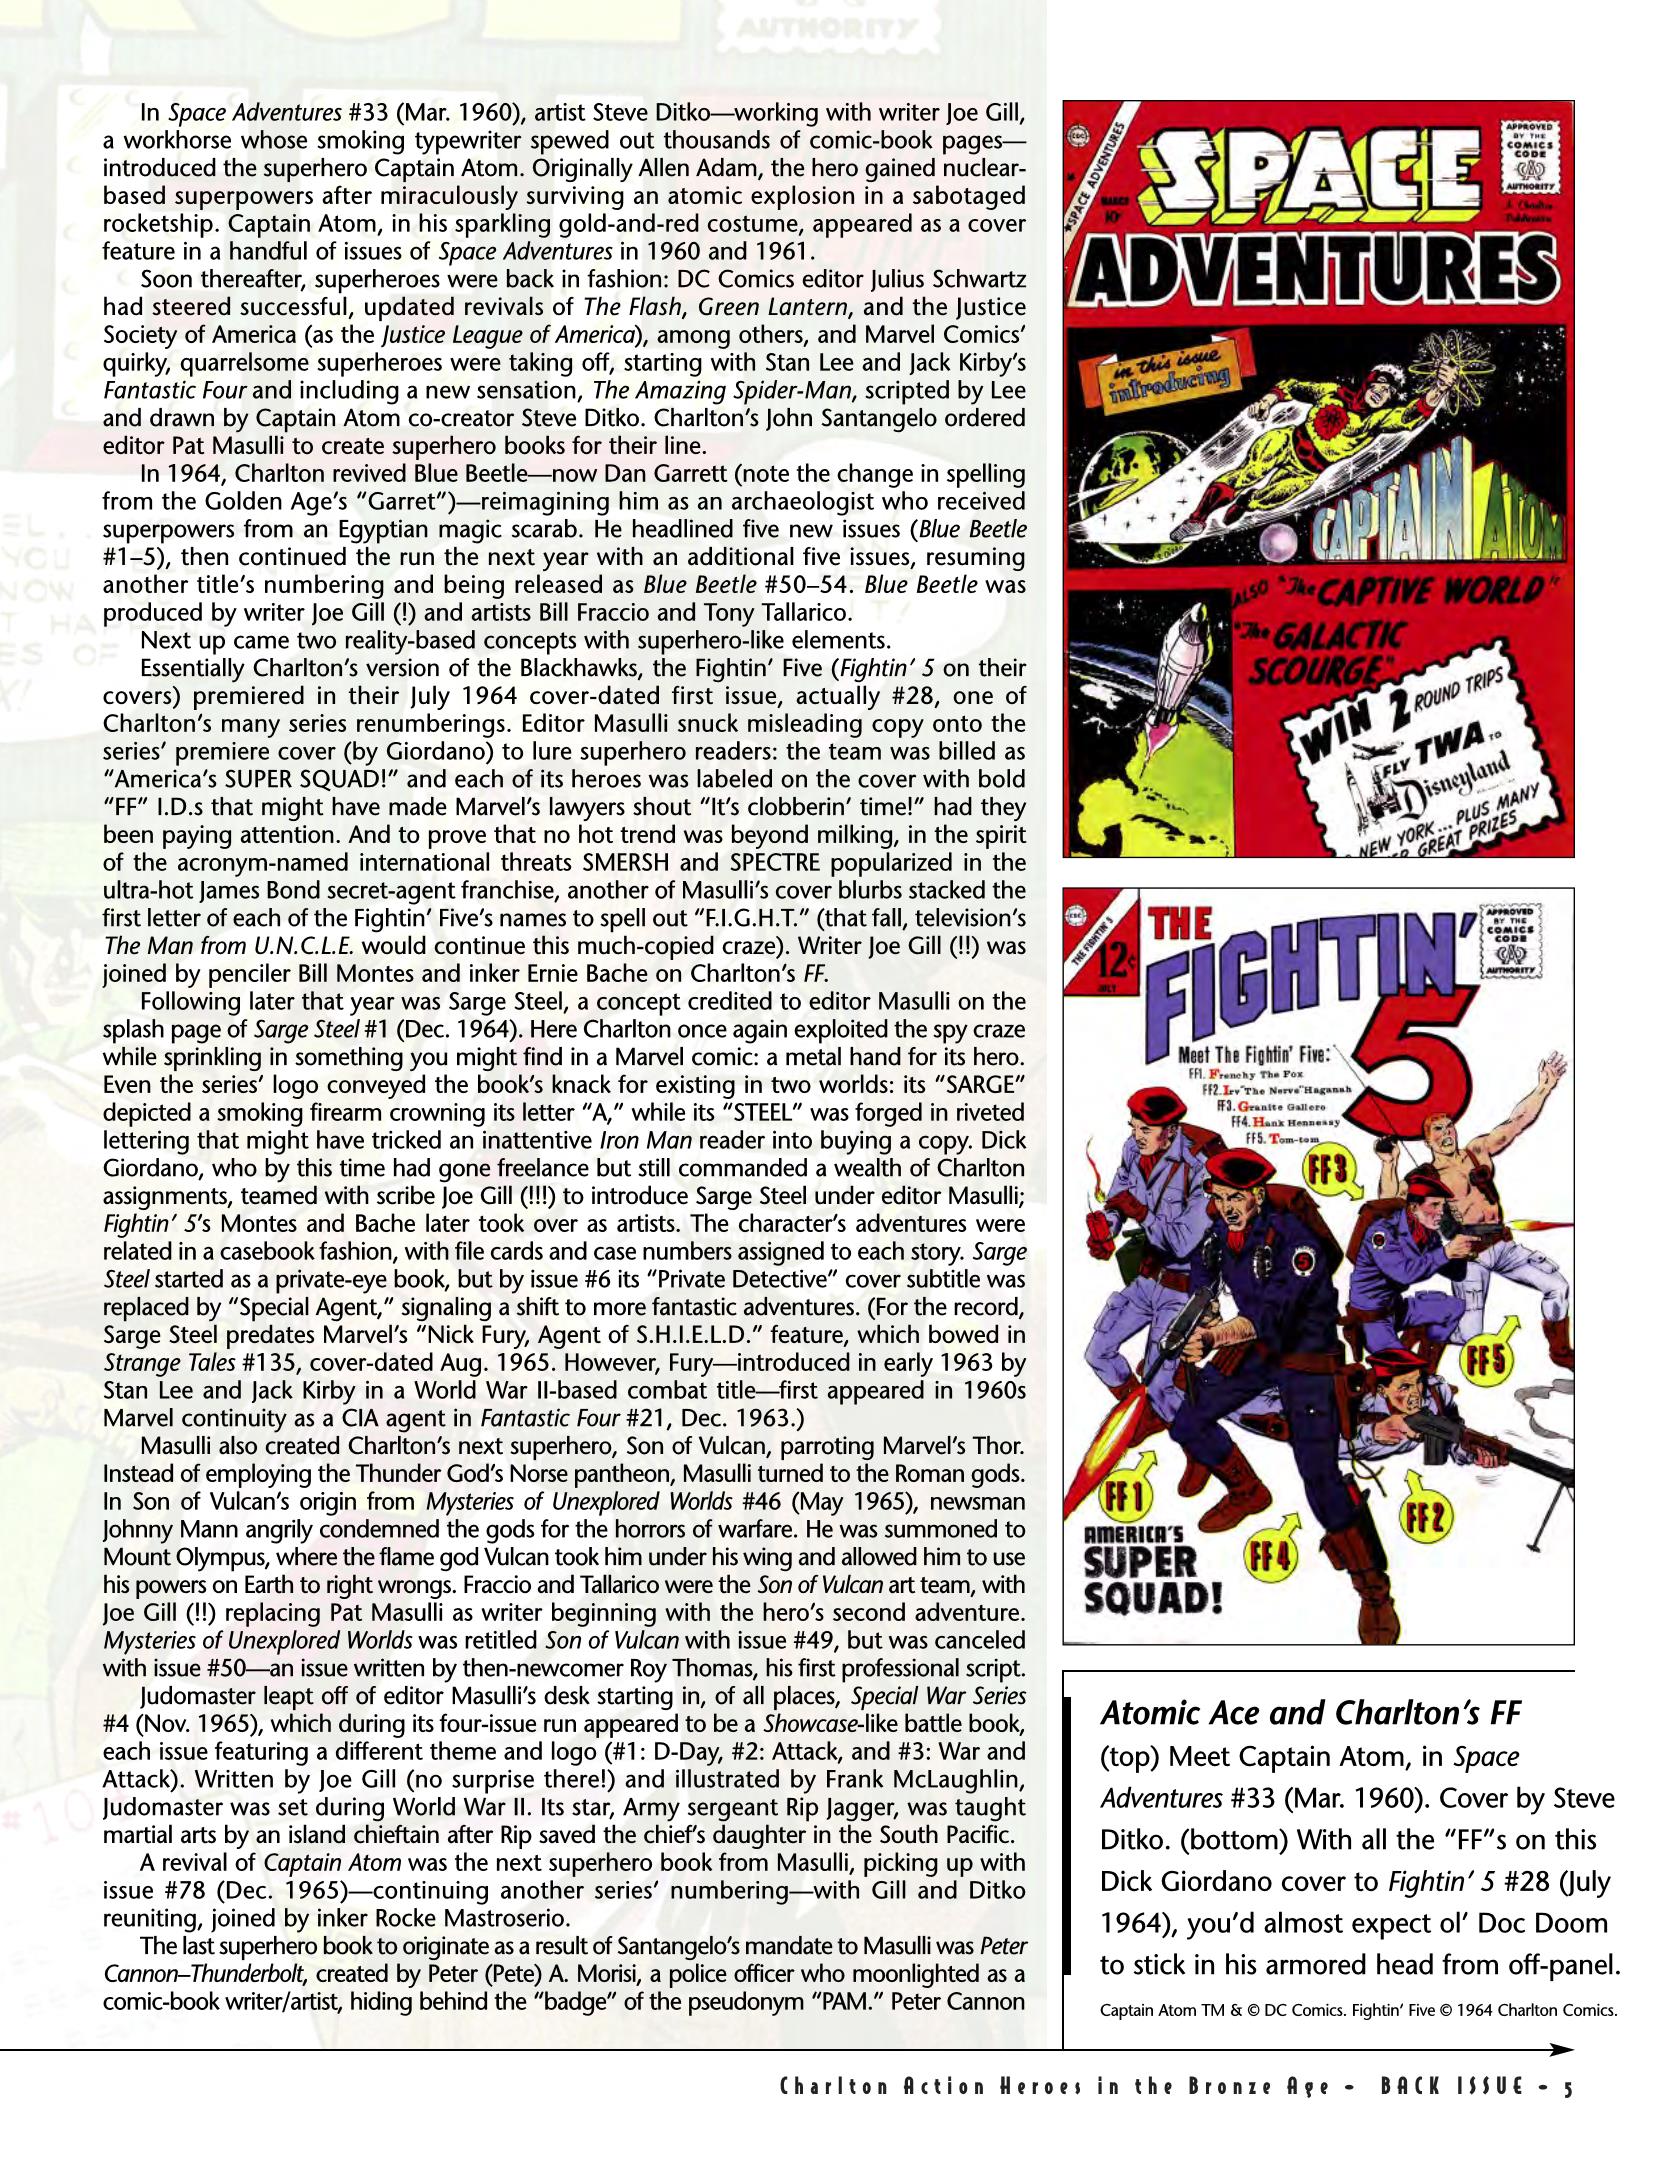 Read online Back Issue comic -  Issue #79 - 7